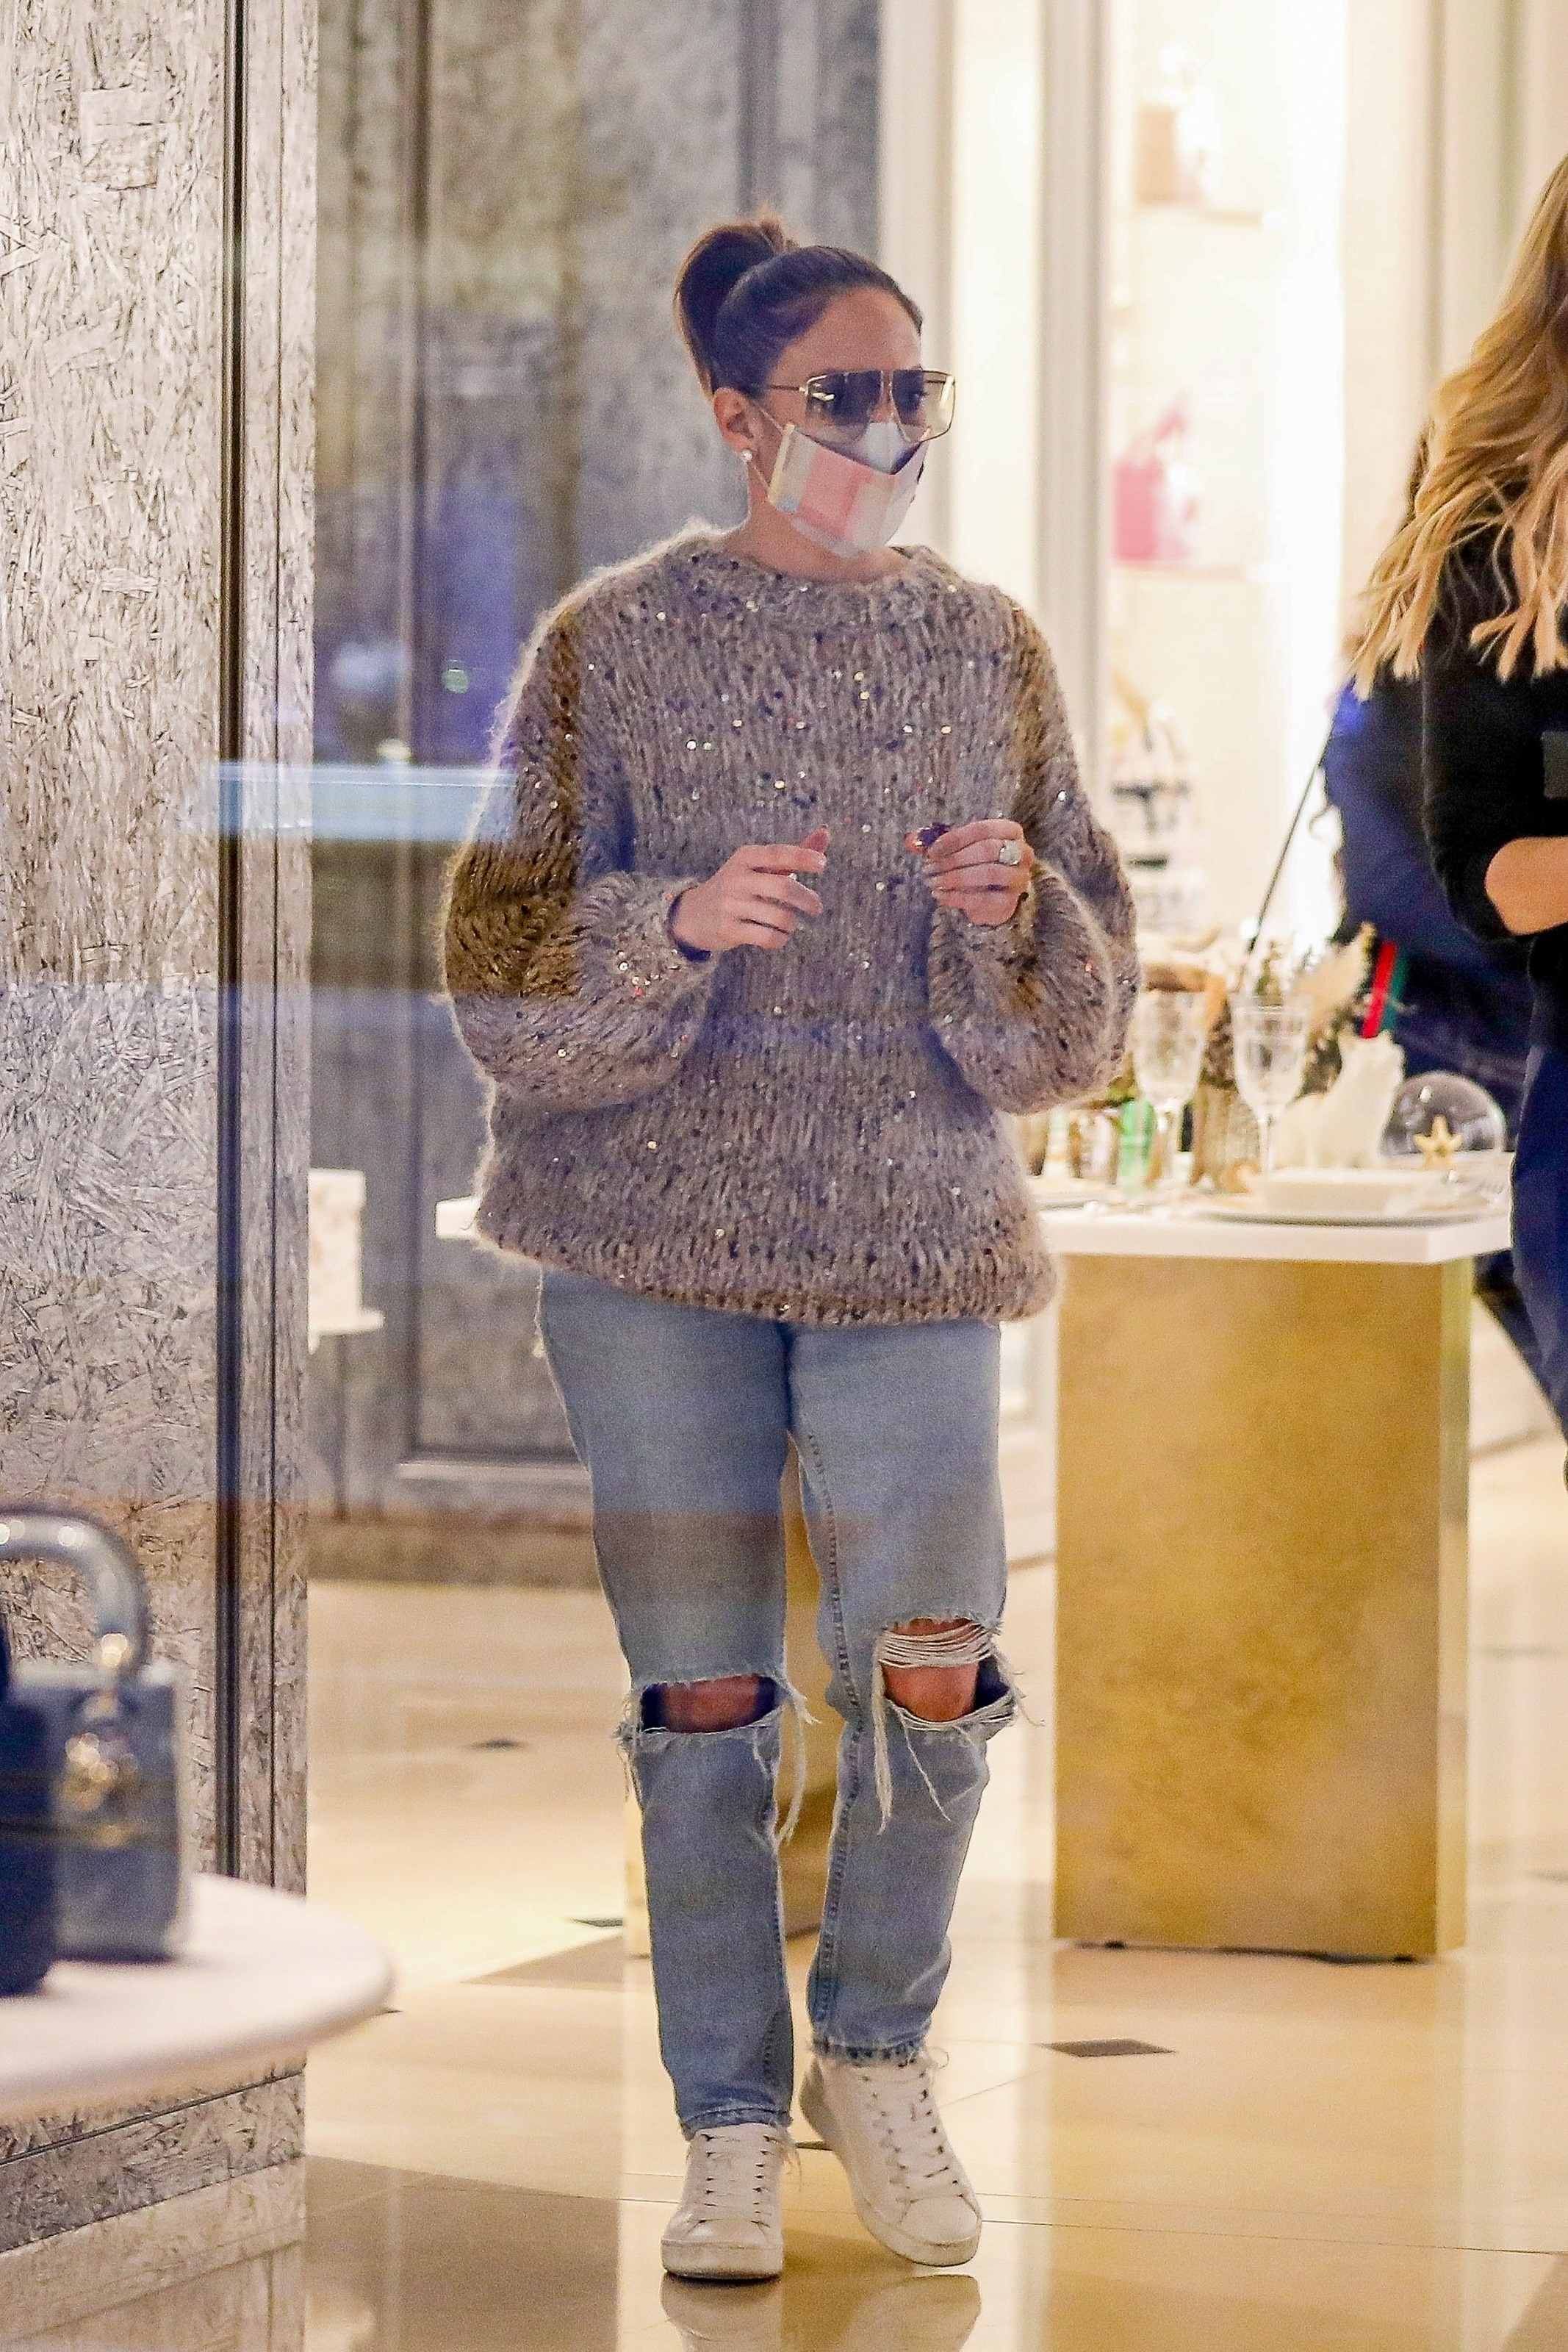 Chloe Sims shopping on Rodeo Drive